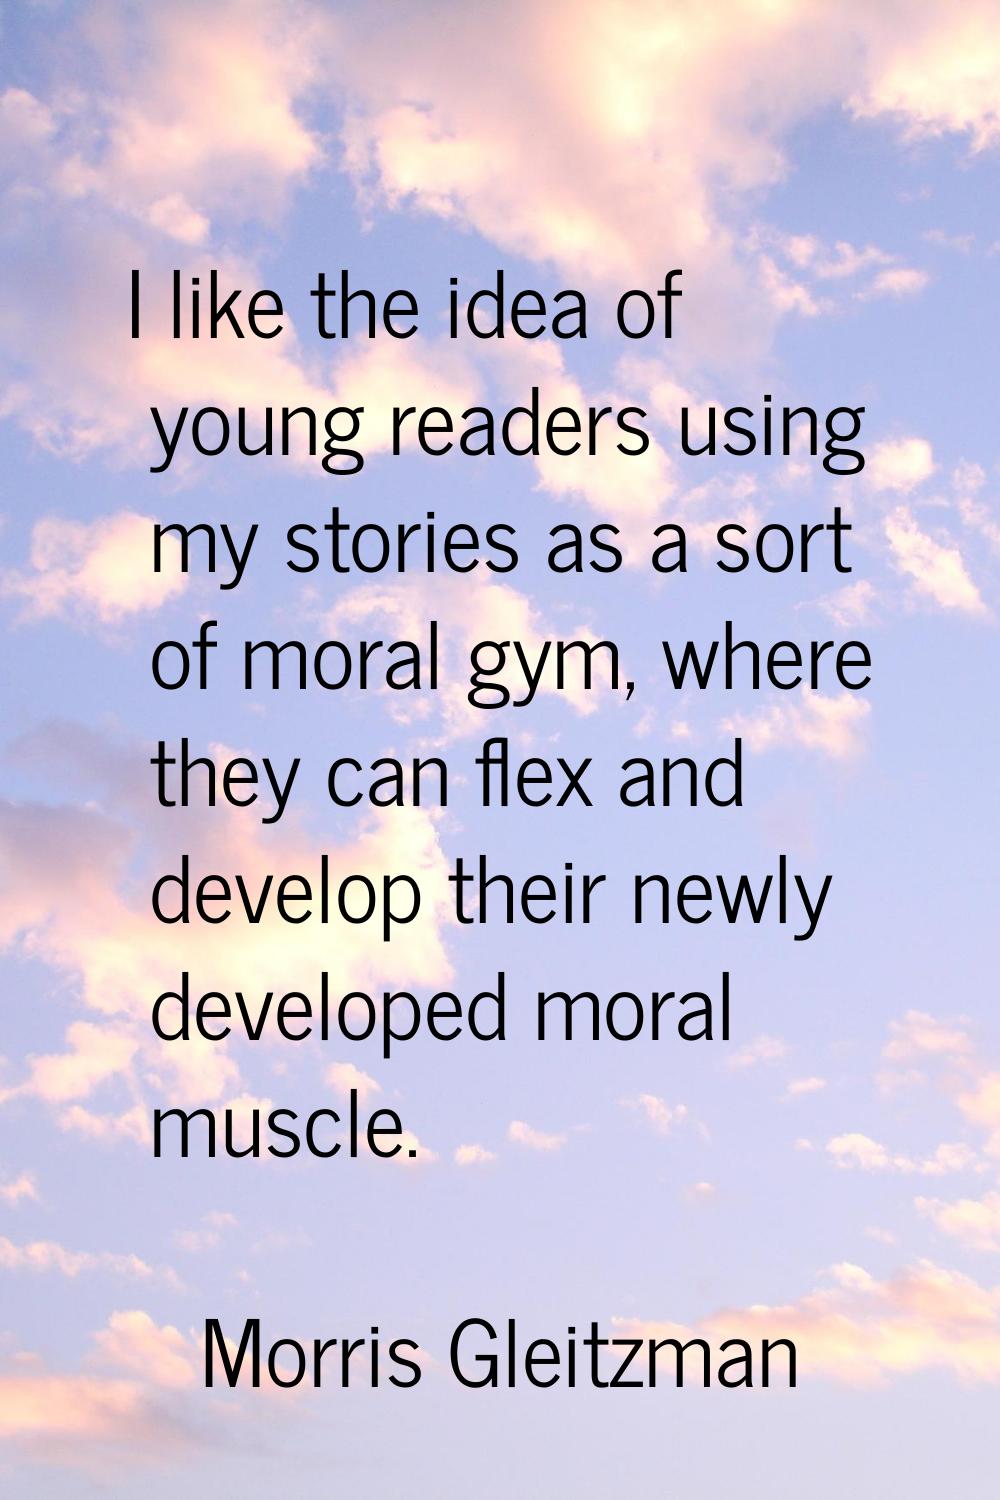 I like the idea of young readers using my stories as a sort of moral gym, where they can flex and d